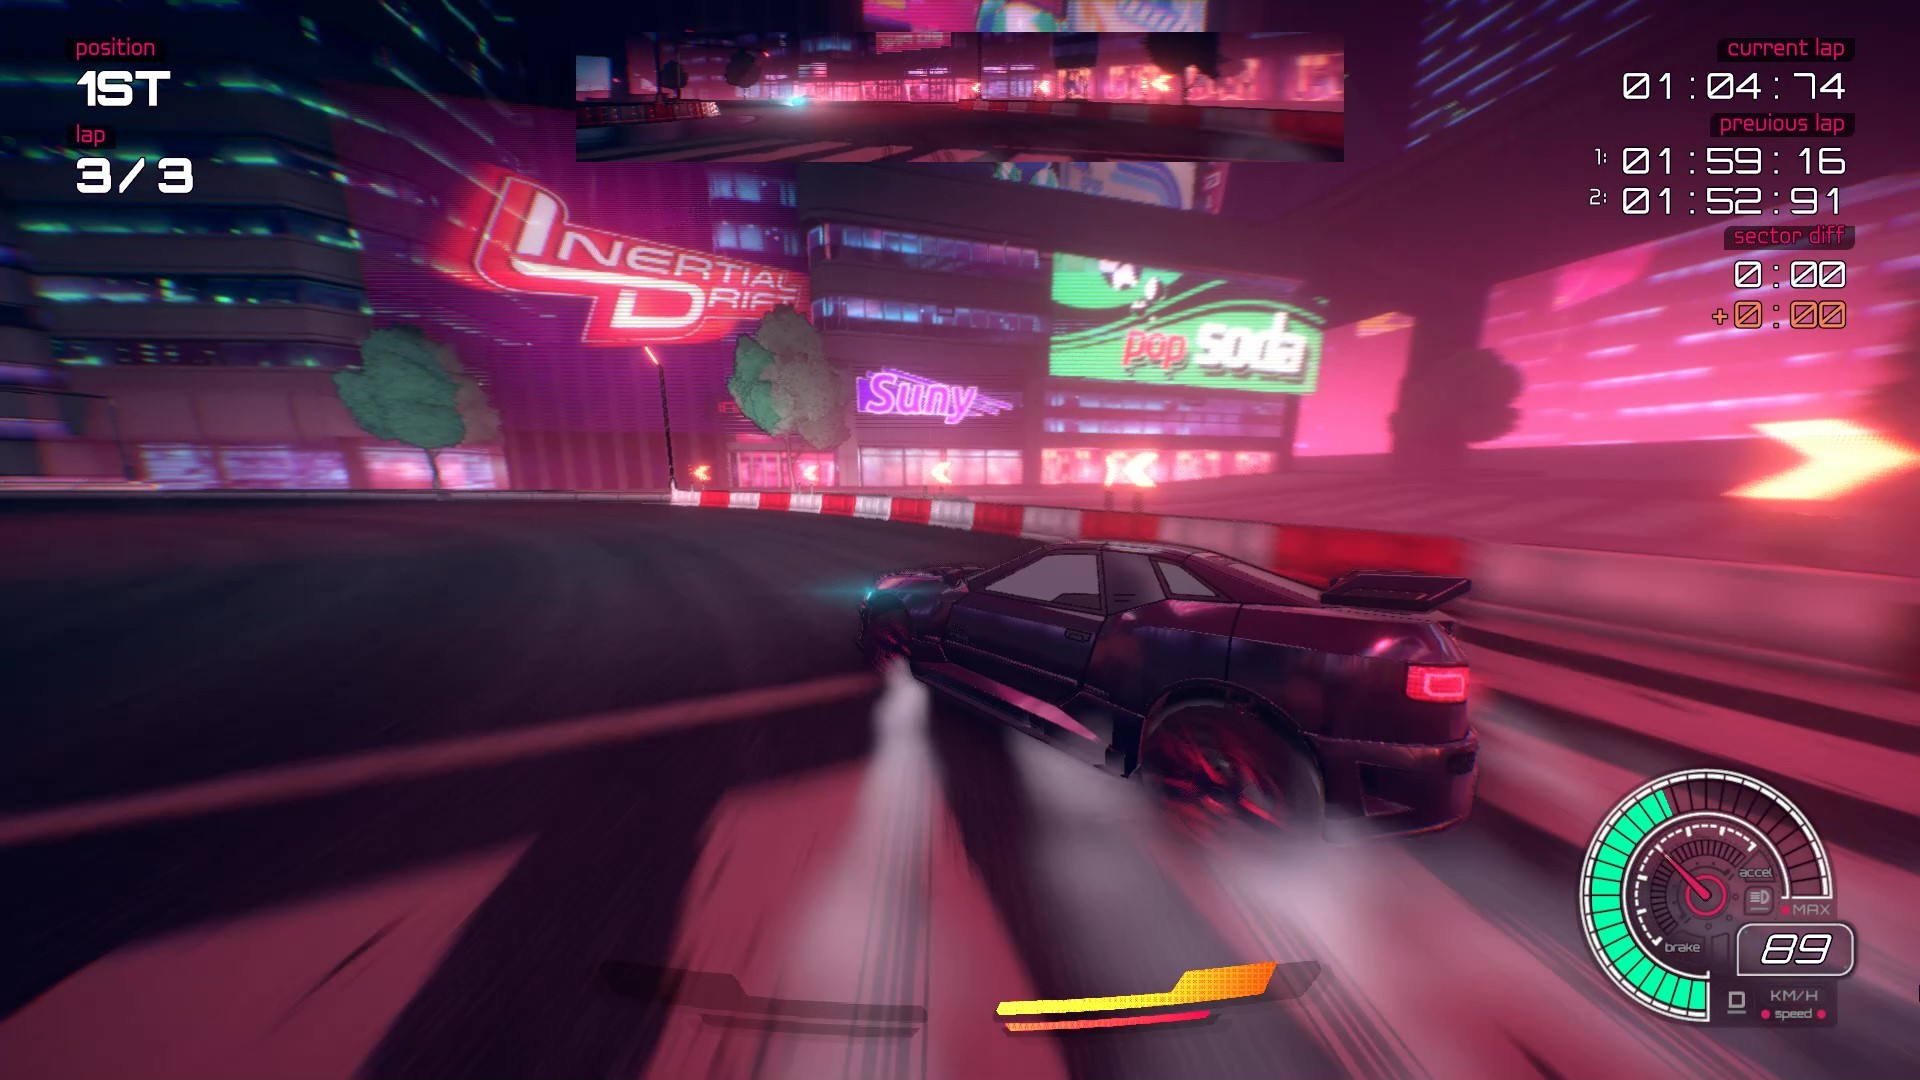 Inertial Drift': A Retro Racer That Keeps Things Simple yet Satisfying